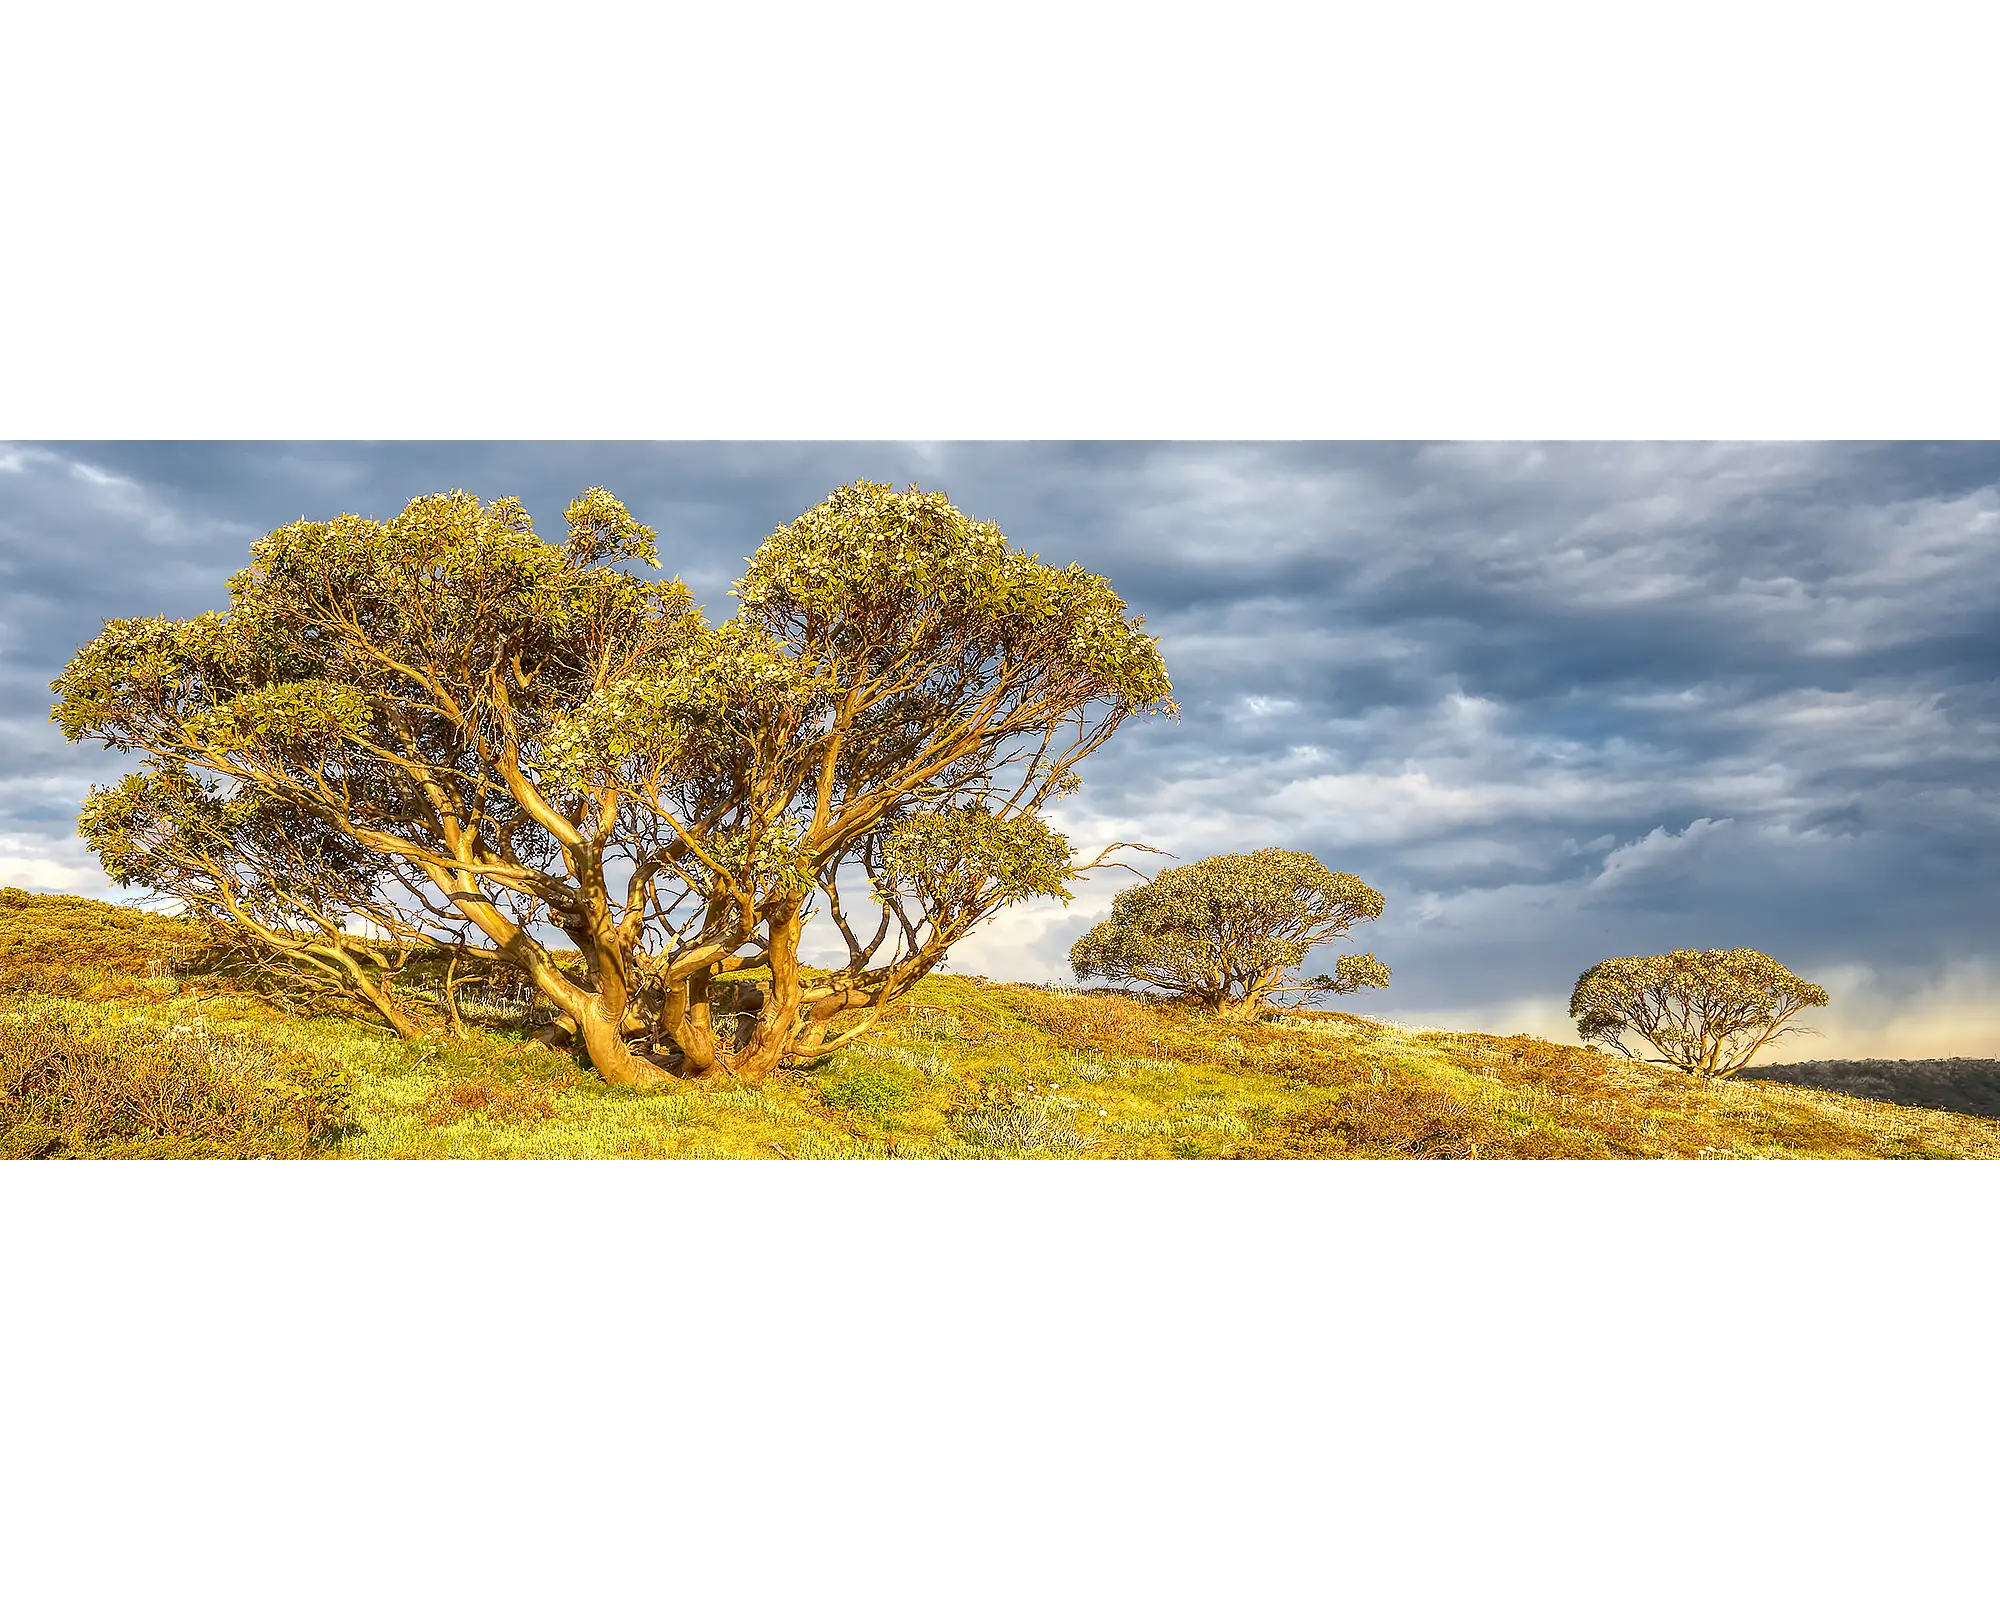 Snow gums in summertime at Mount Hotham, Alpine National Park. 